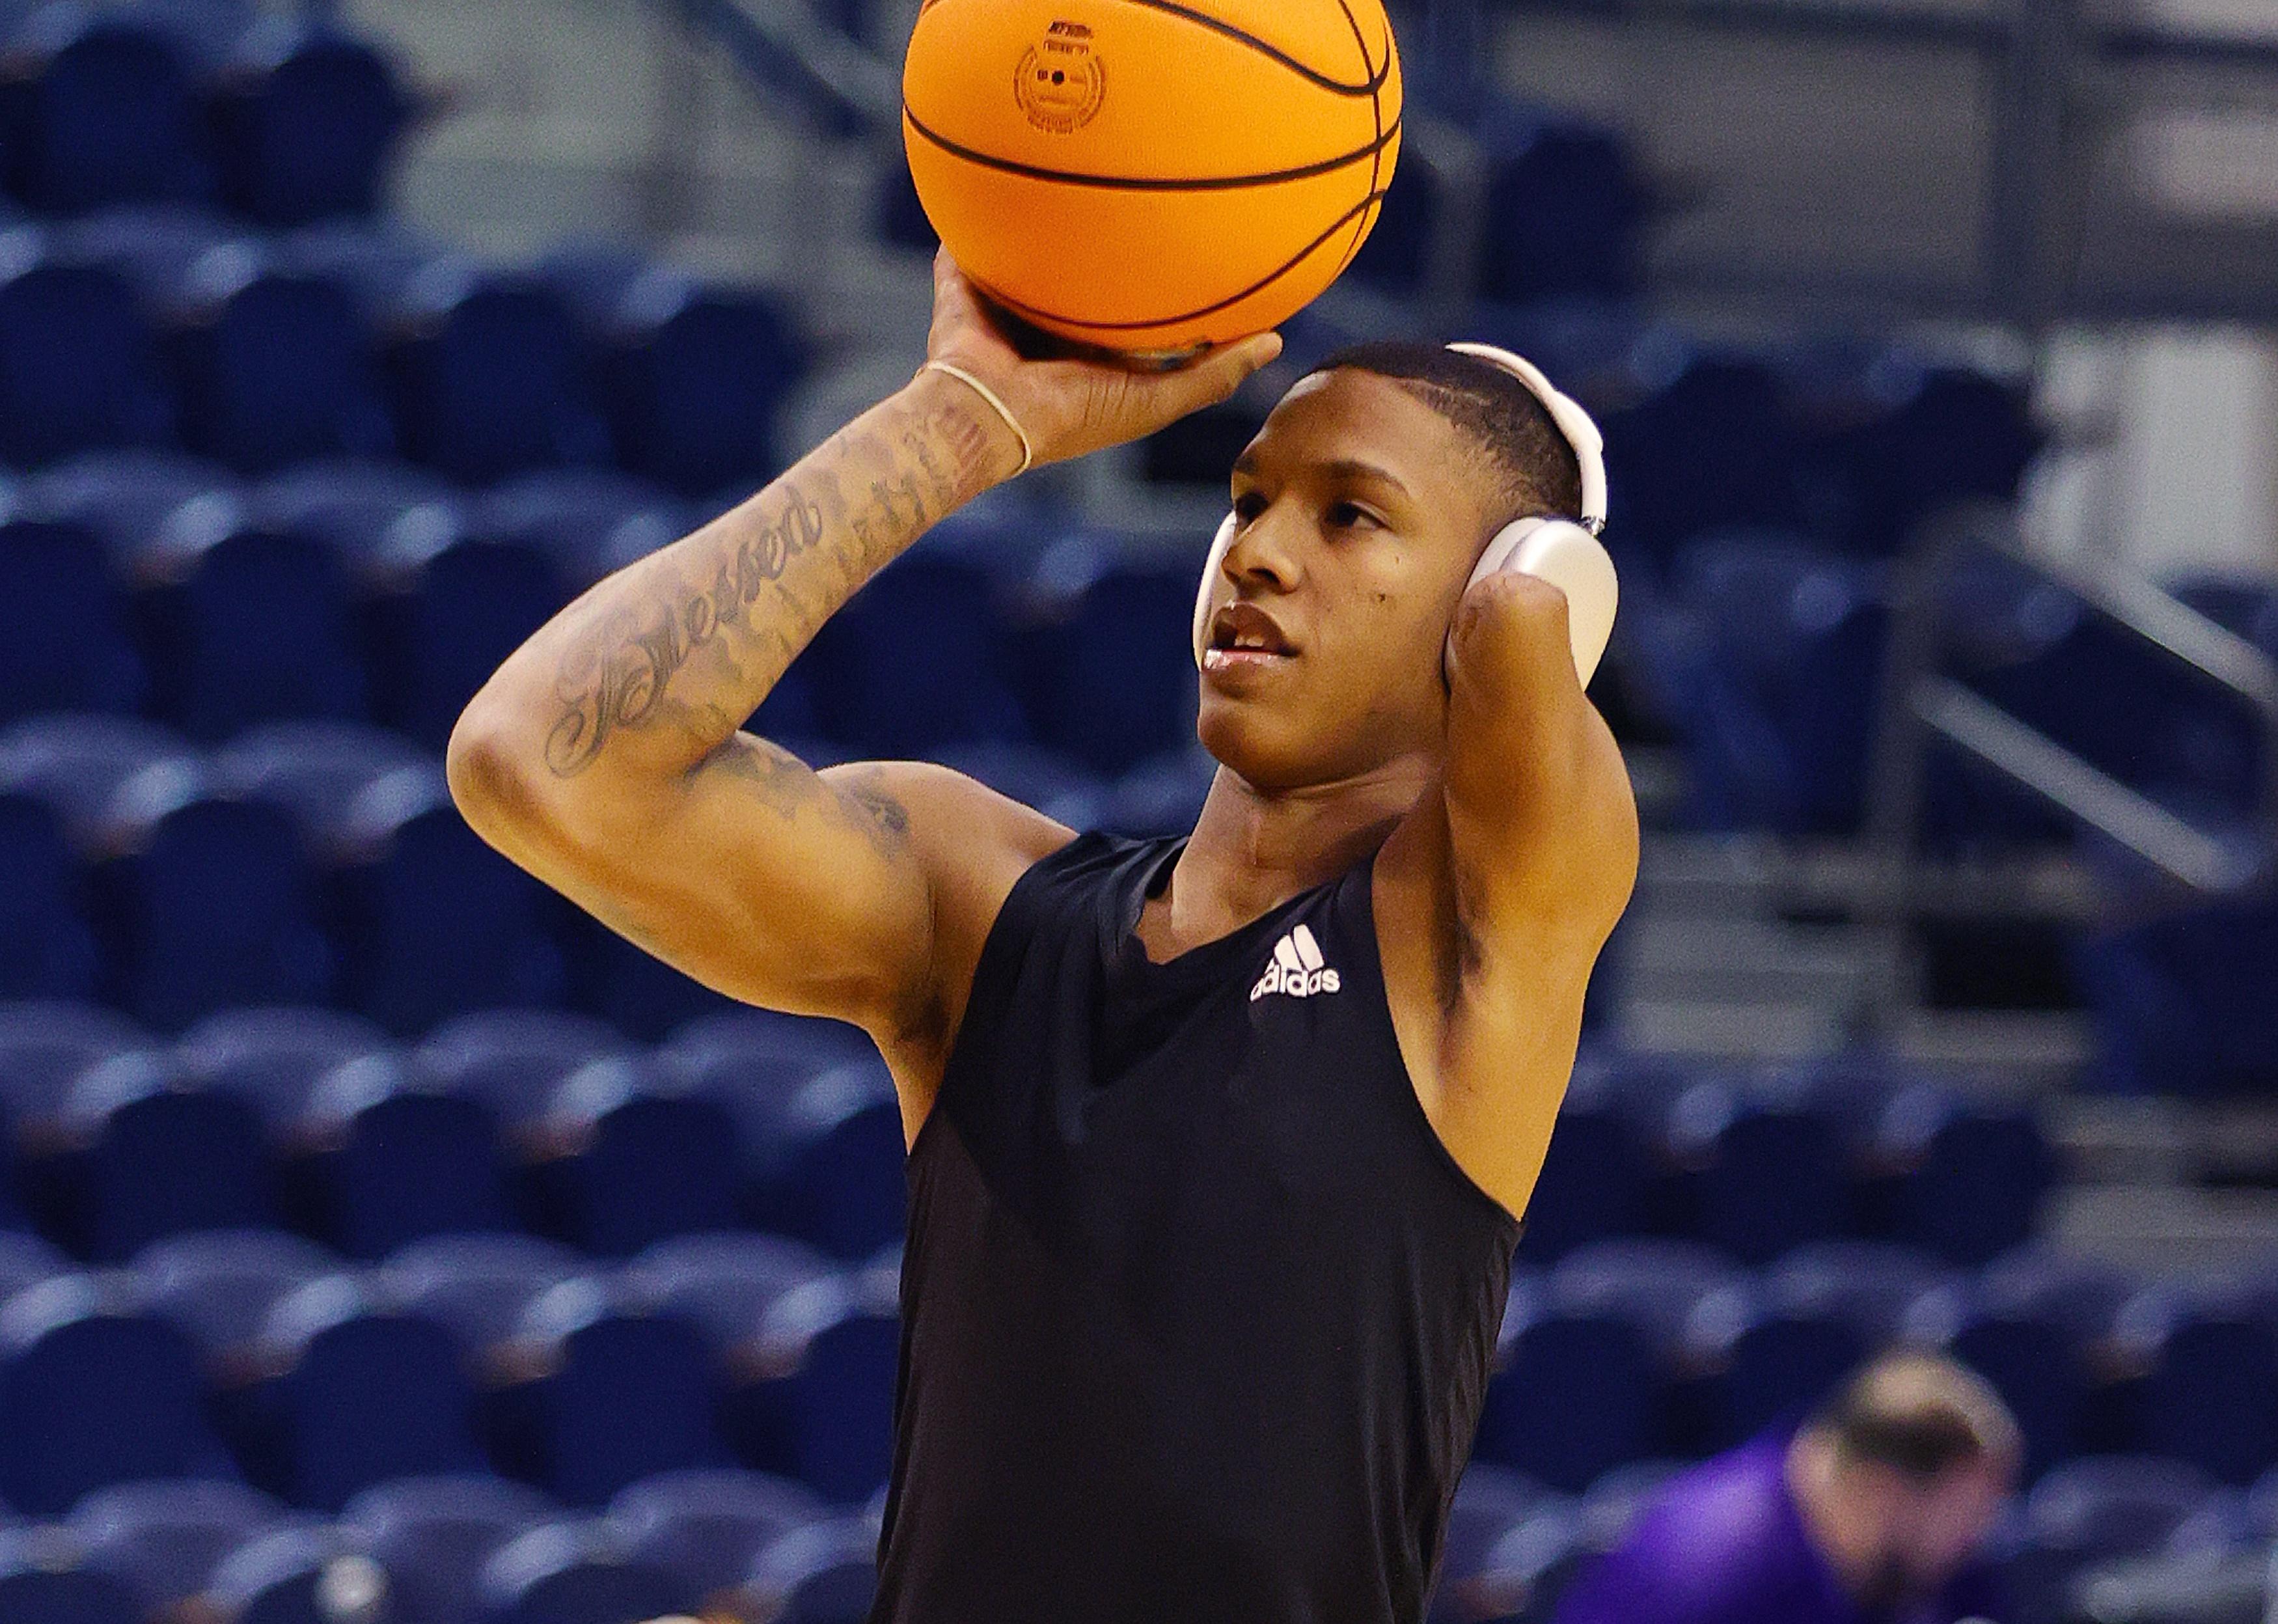 Hansel Enmanuel of the Northwestern State Demons warms up before a game.